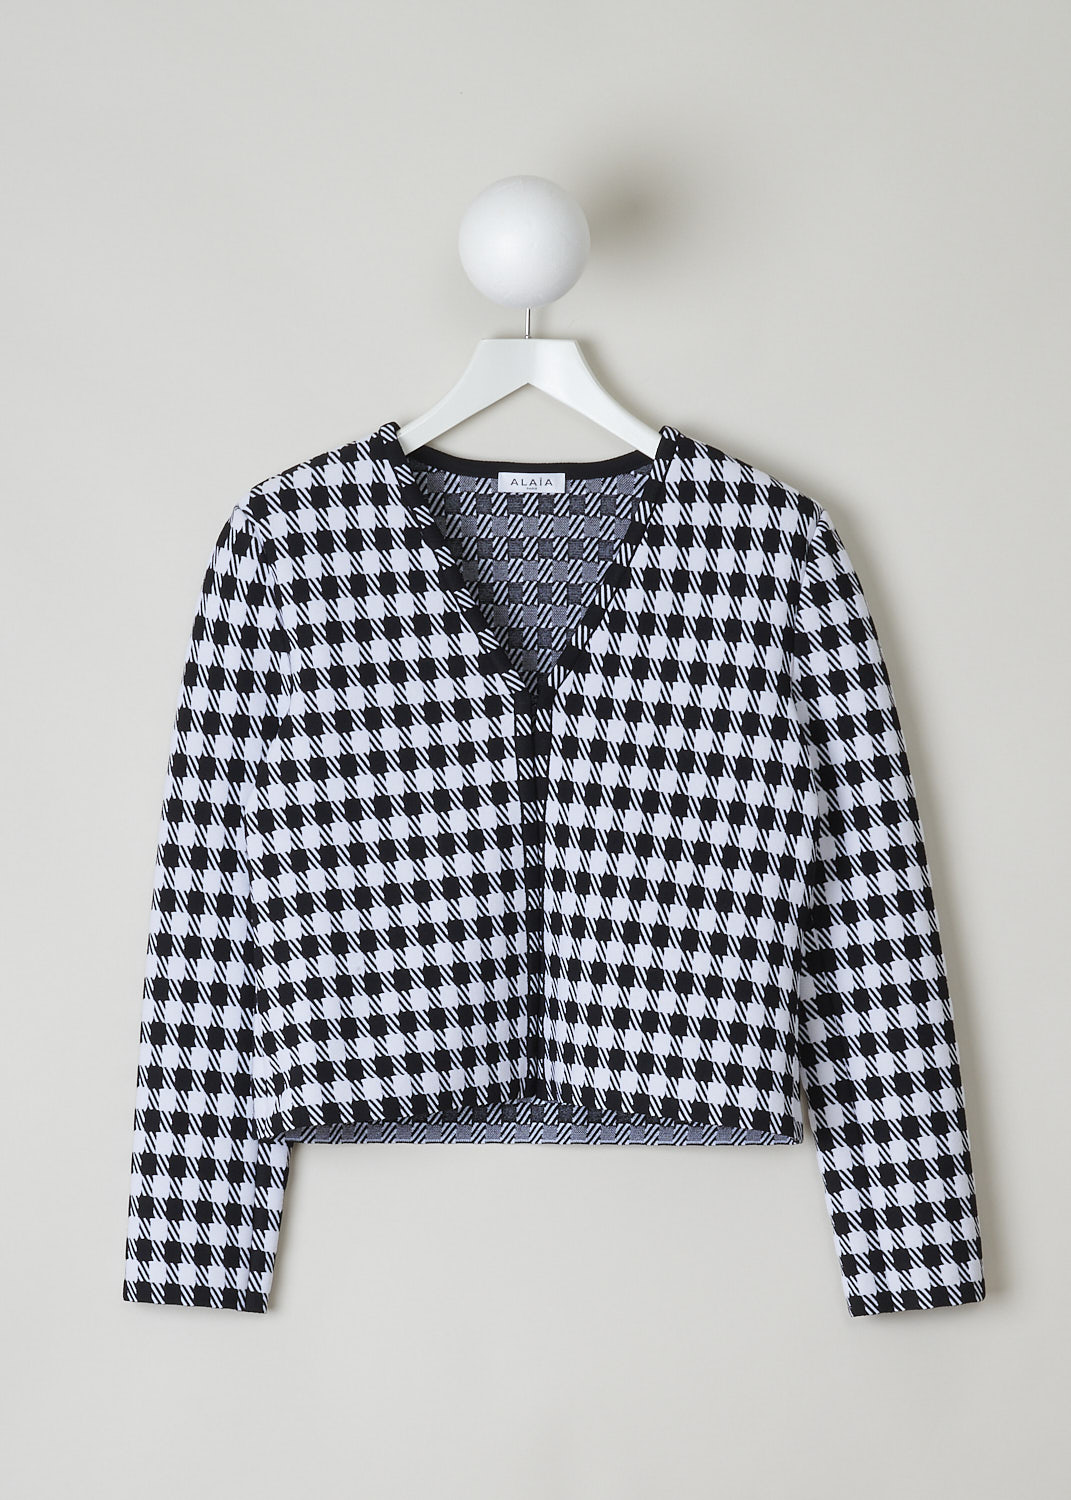 ALAÏA, CROPPED HOUNDSTOOTH PRINTED JACKET, AA9V10432M710_HOUNDSTOOTH_991, Black, White, Print, Front, This long sleeve jacket has a magnified black and white Houndstooth print throughout. The jacket has a cropped length, with the hem falling to the hip. The jacket has an open front with just a single hook-closure on the V-necks end. The jacket has shoulder pads.


